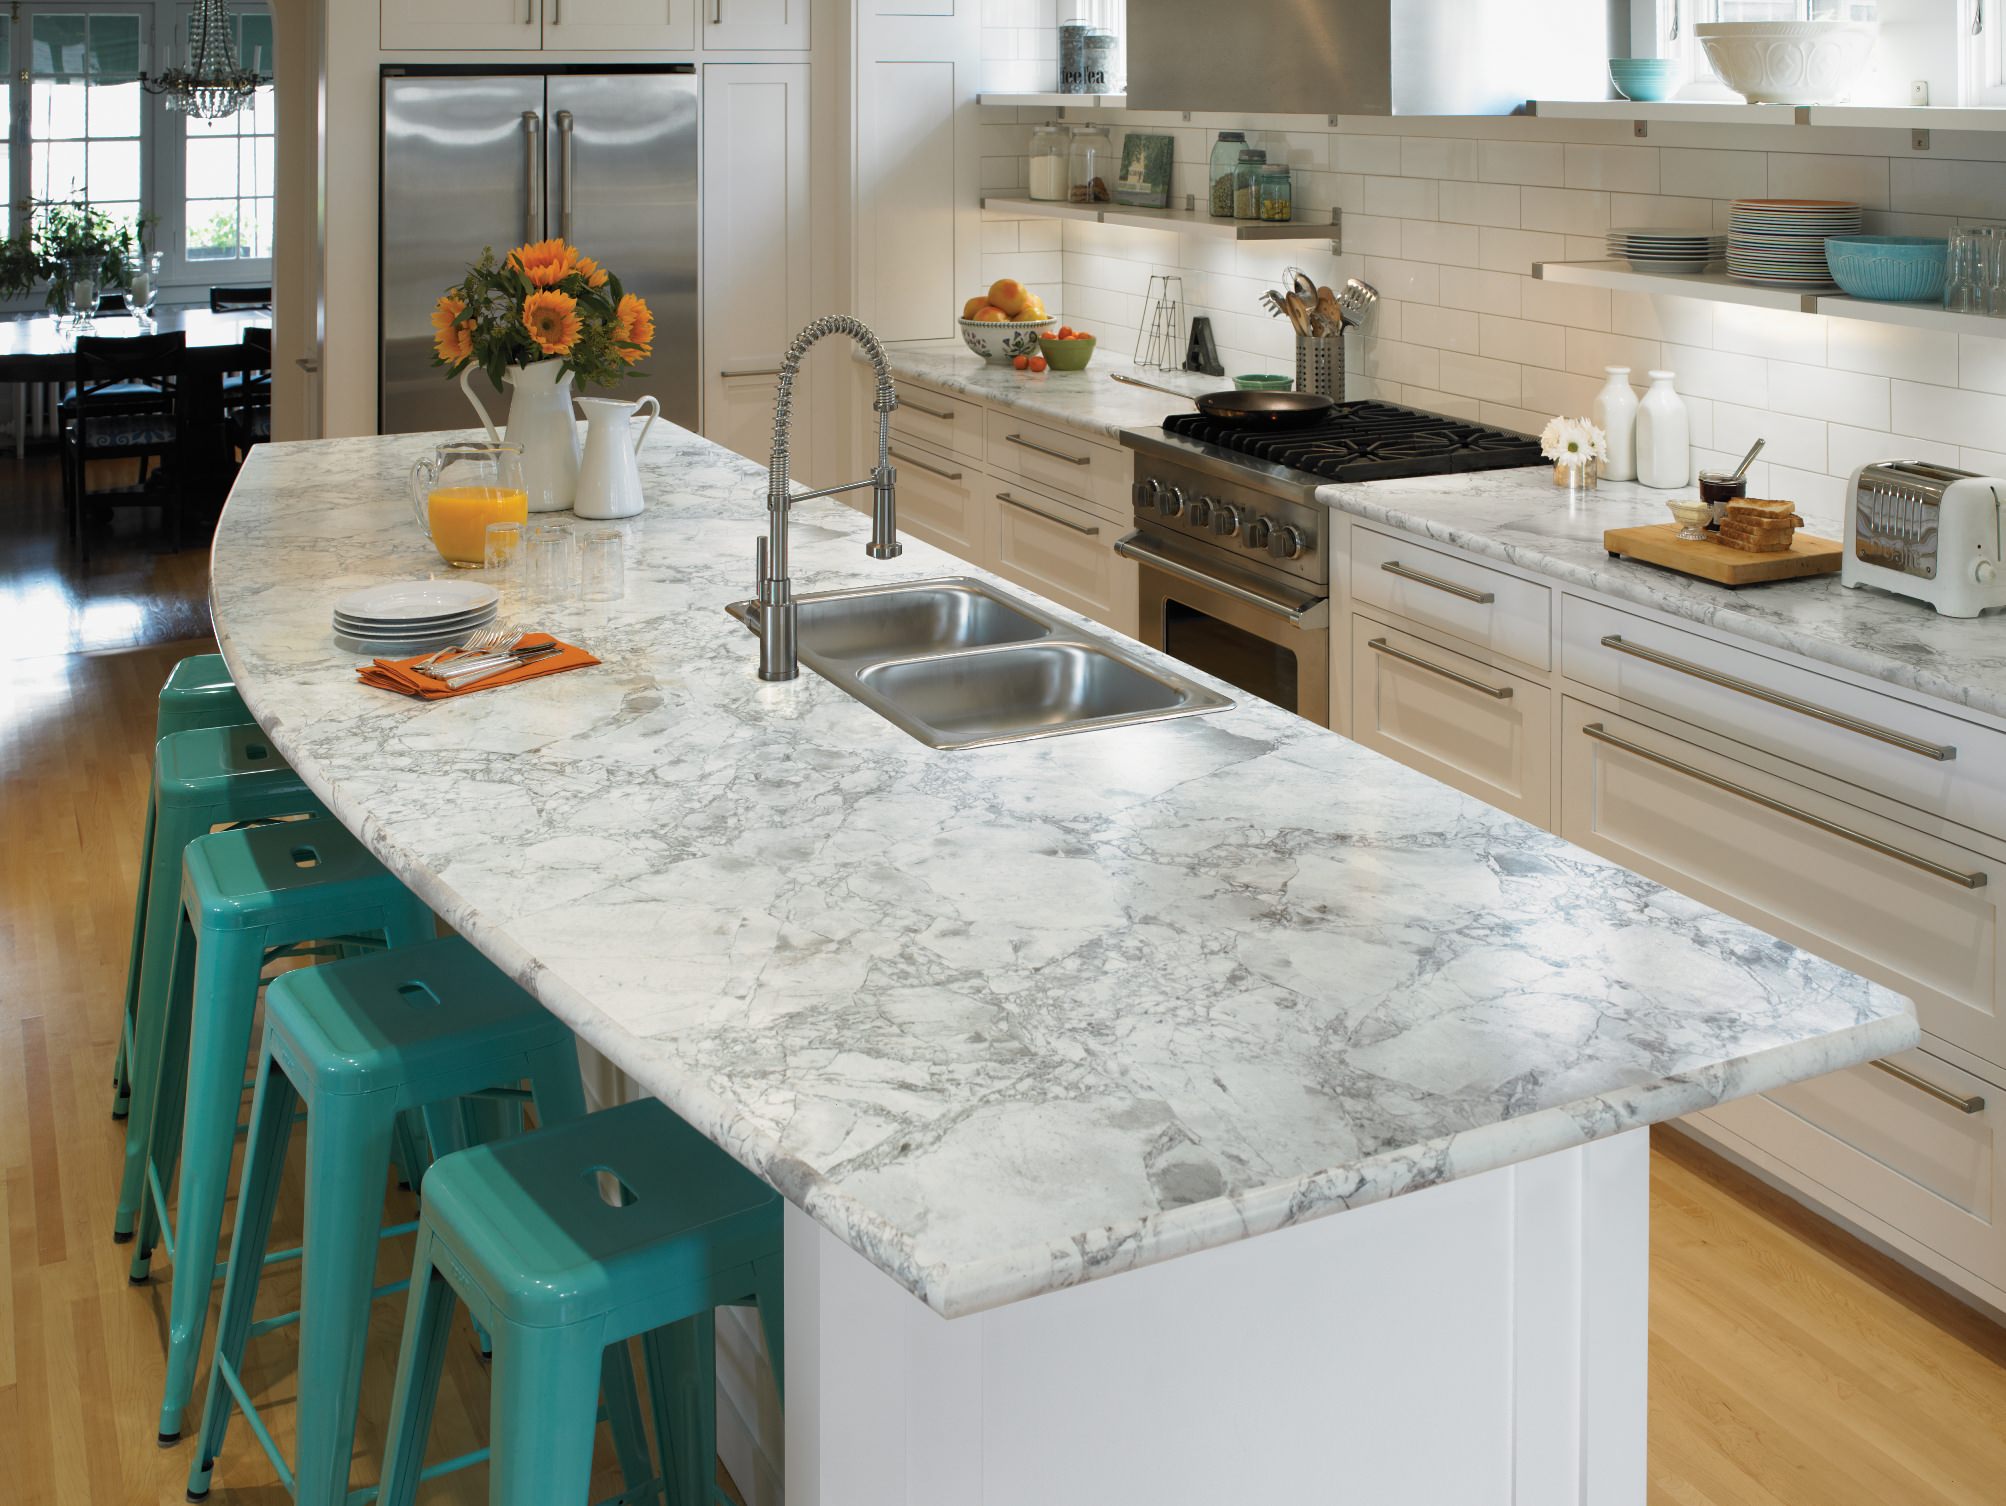 Formica Countertops - B&T Kitchens & Baths